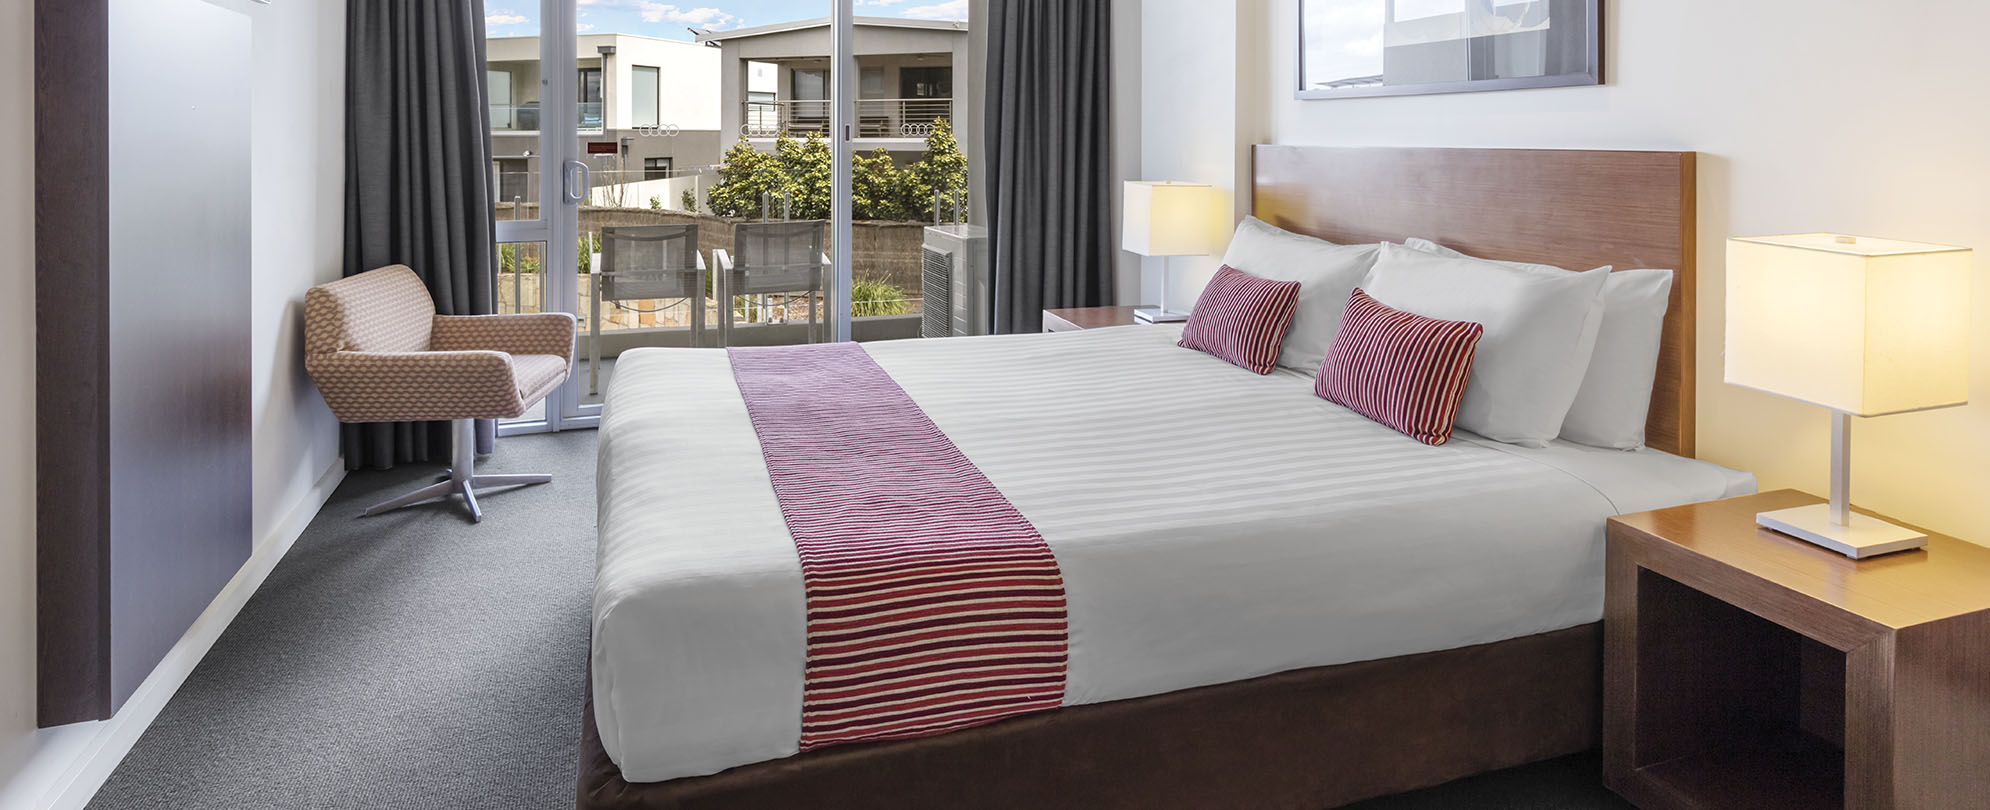 A bedroom in one of the suites at Club Wyndham Torquay.